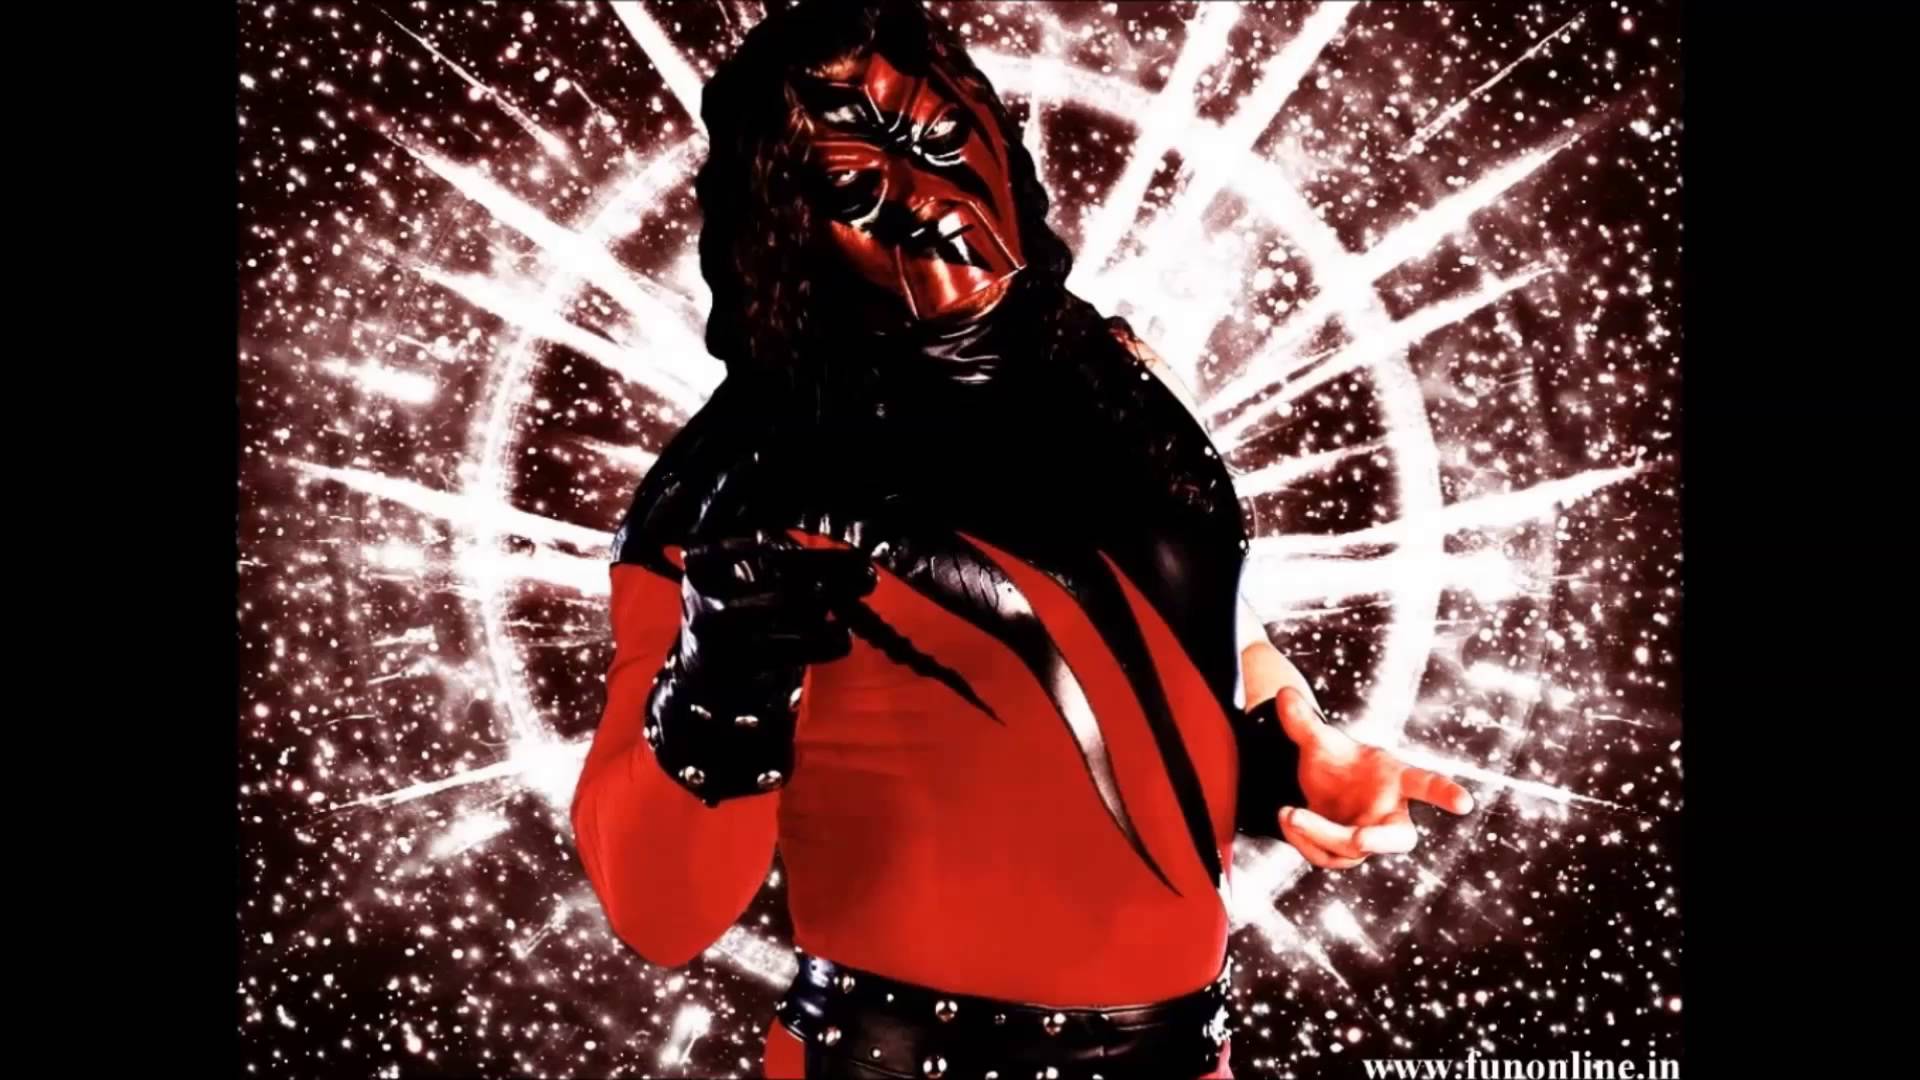 WWE: Masked Kane old Theme Song - ´´Out of the fire´´ - 2013 pyro